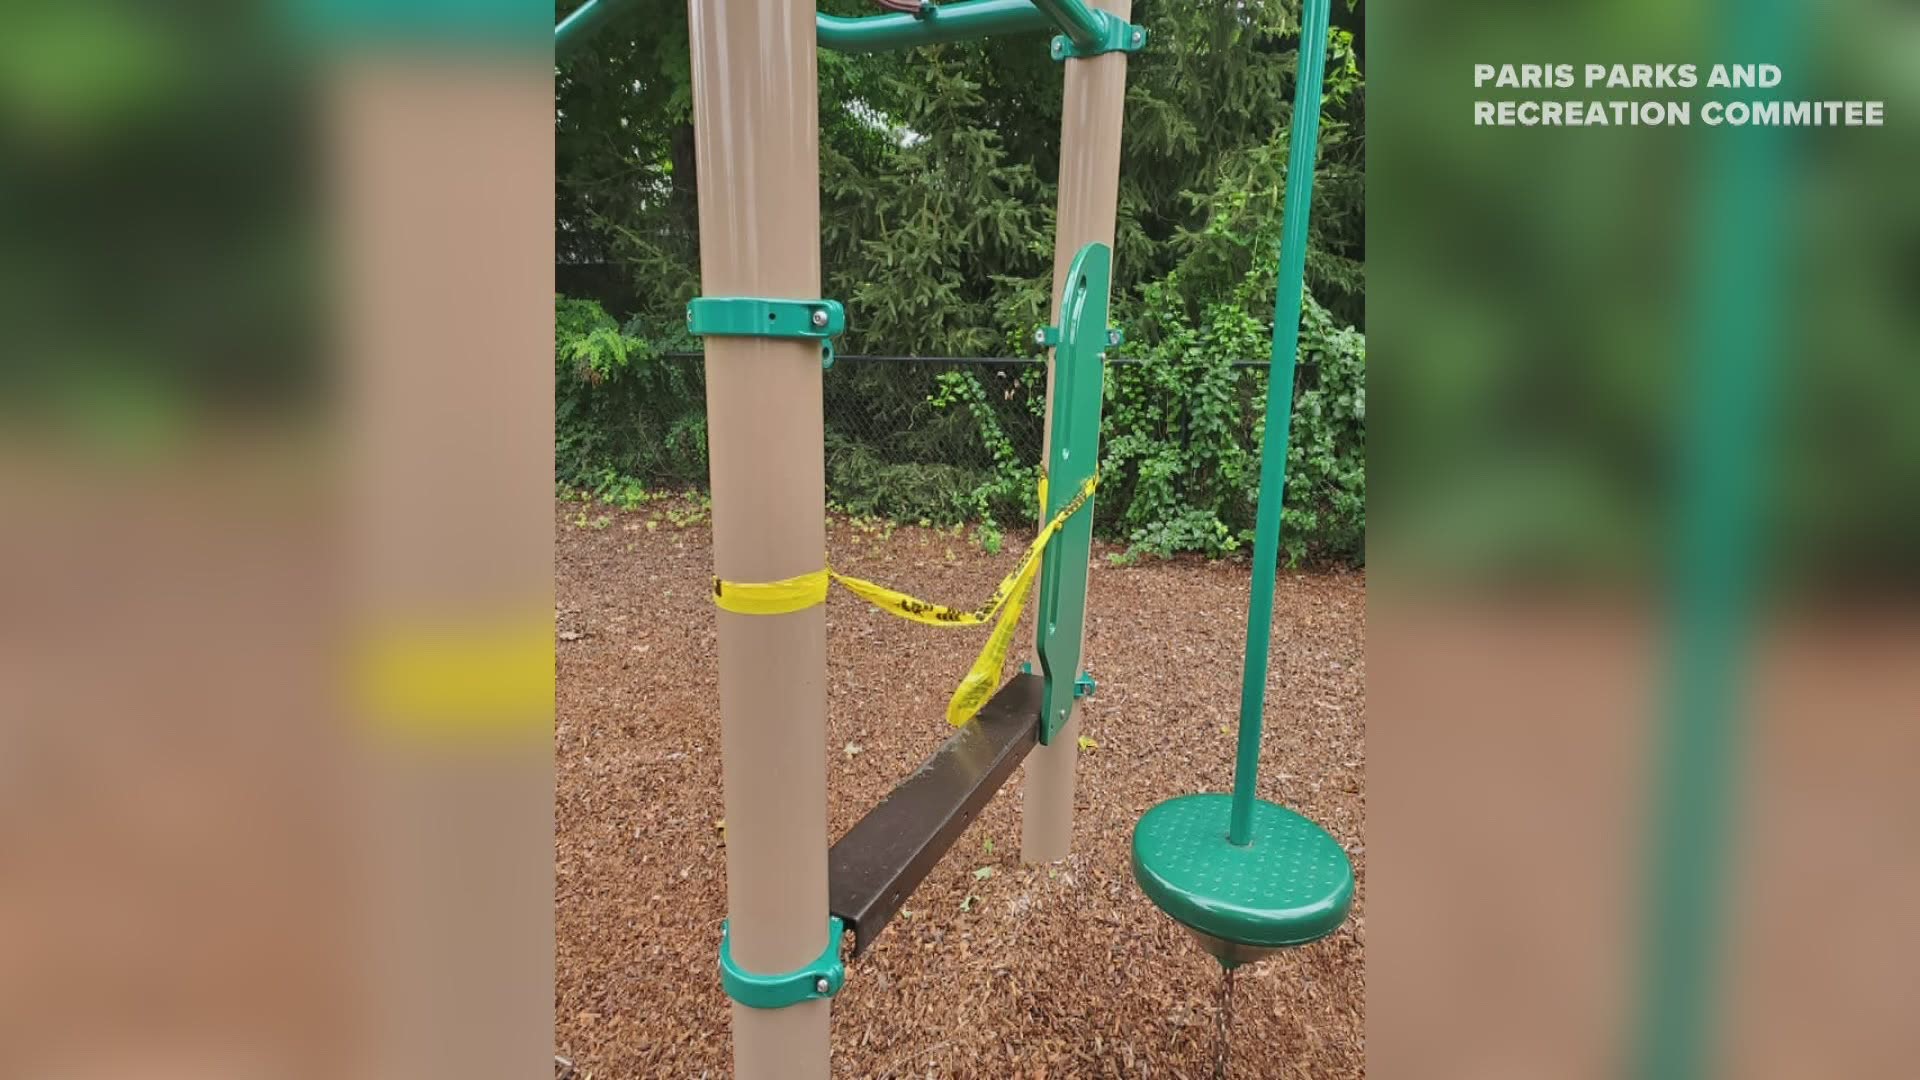 The Moore Park playground will be closed until repairs can be made.